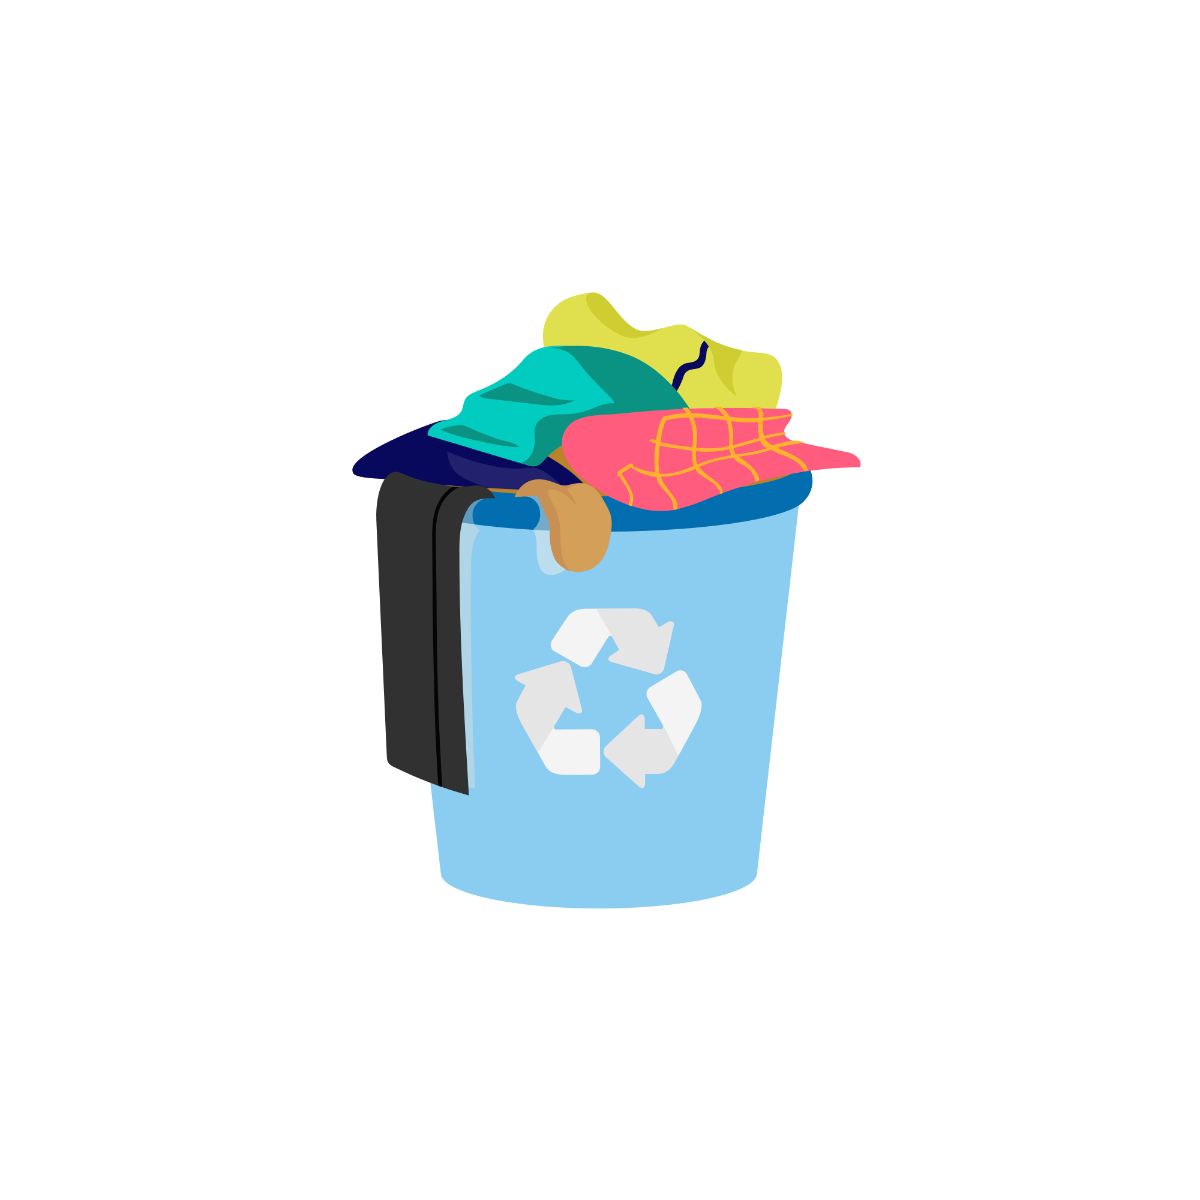 Recycle Clothes Vector Template